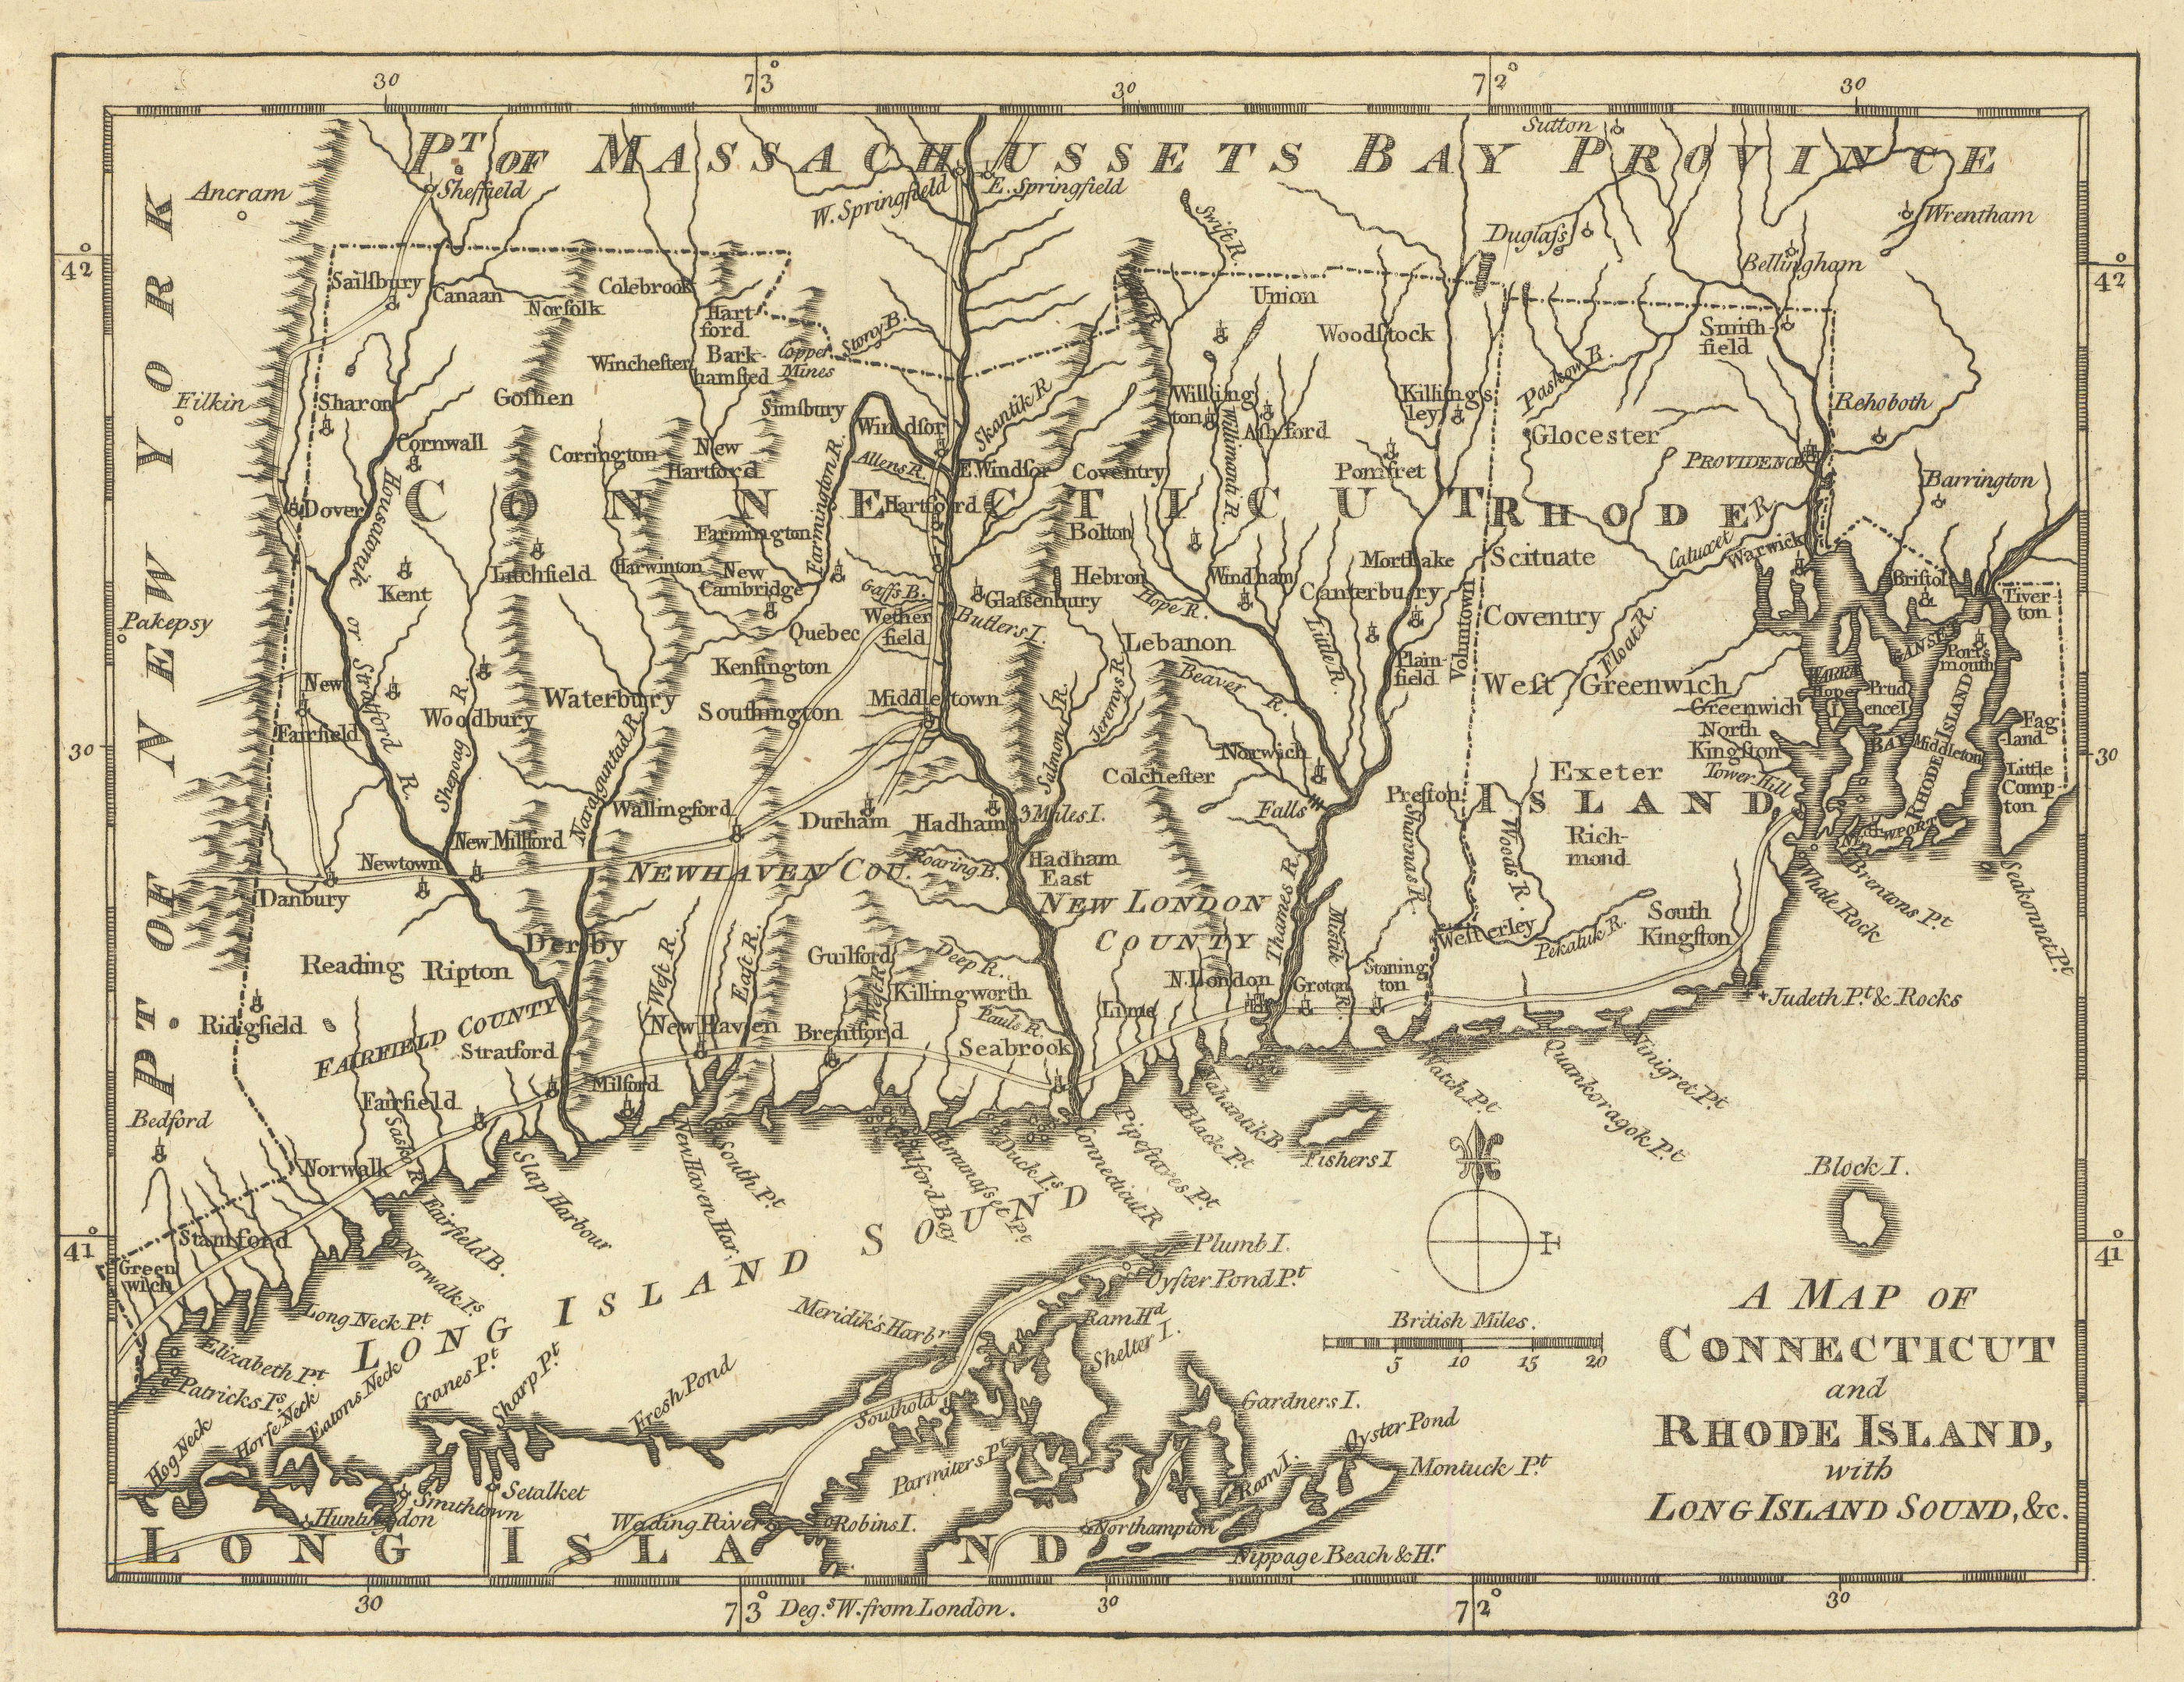 A map of Connecticut and Rhode Island with Long Island Sound. GENTS MAG 1776